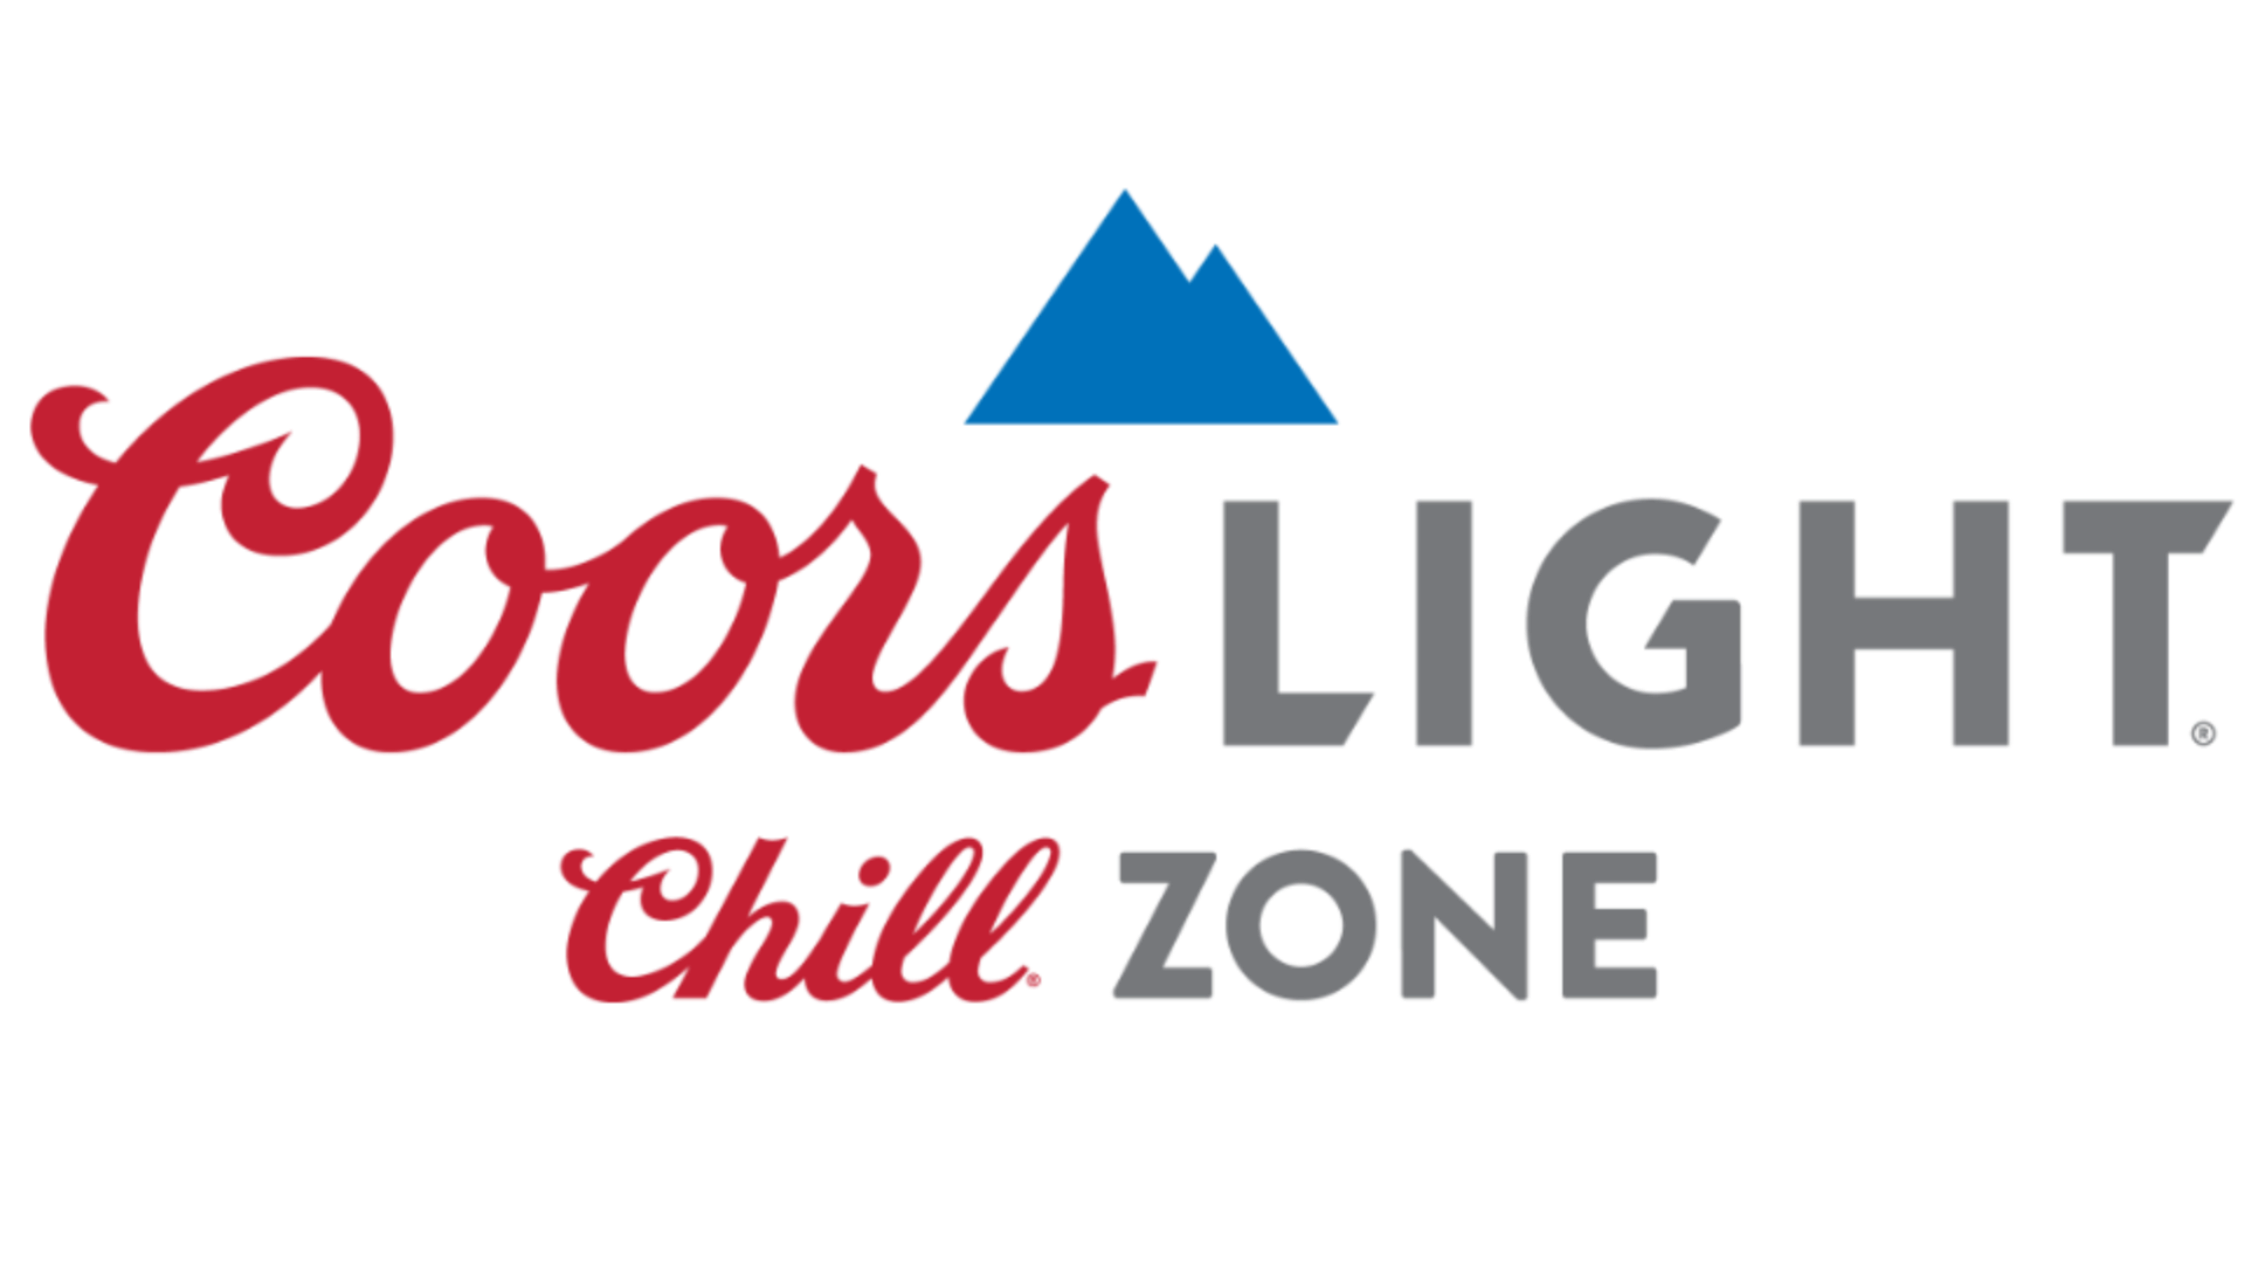 Coors Light Chill Zone